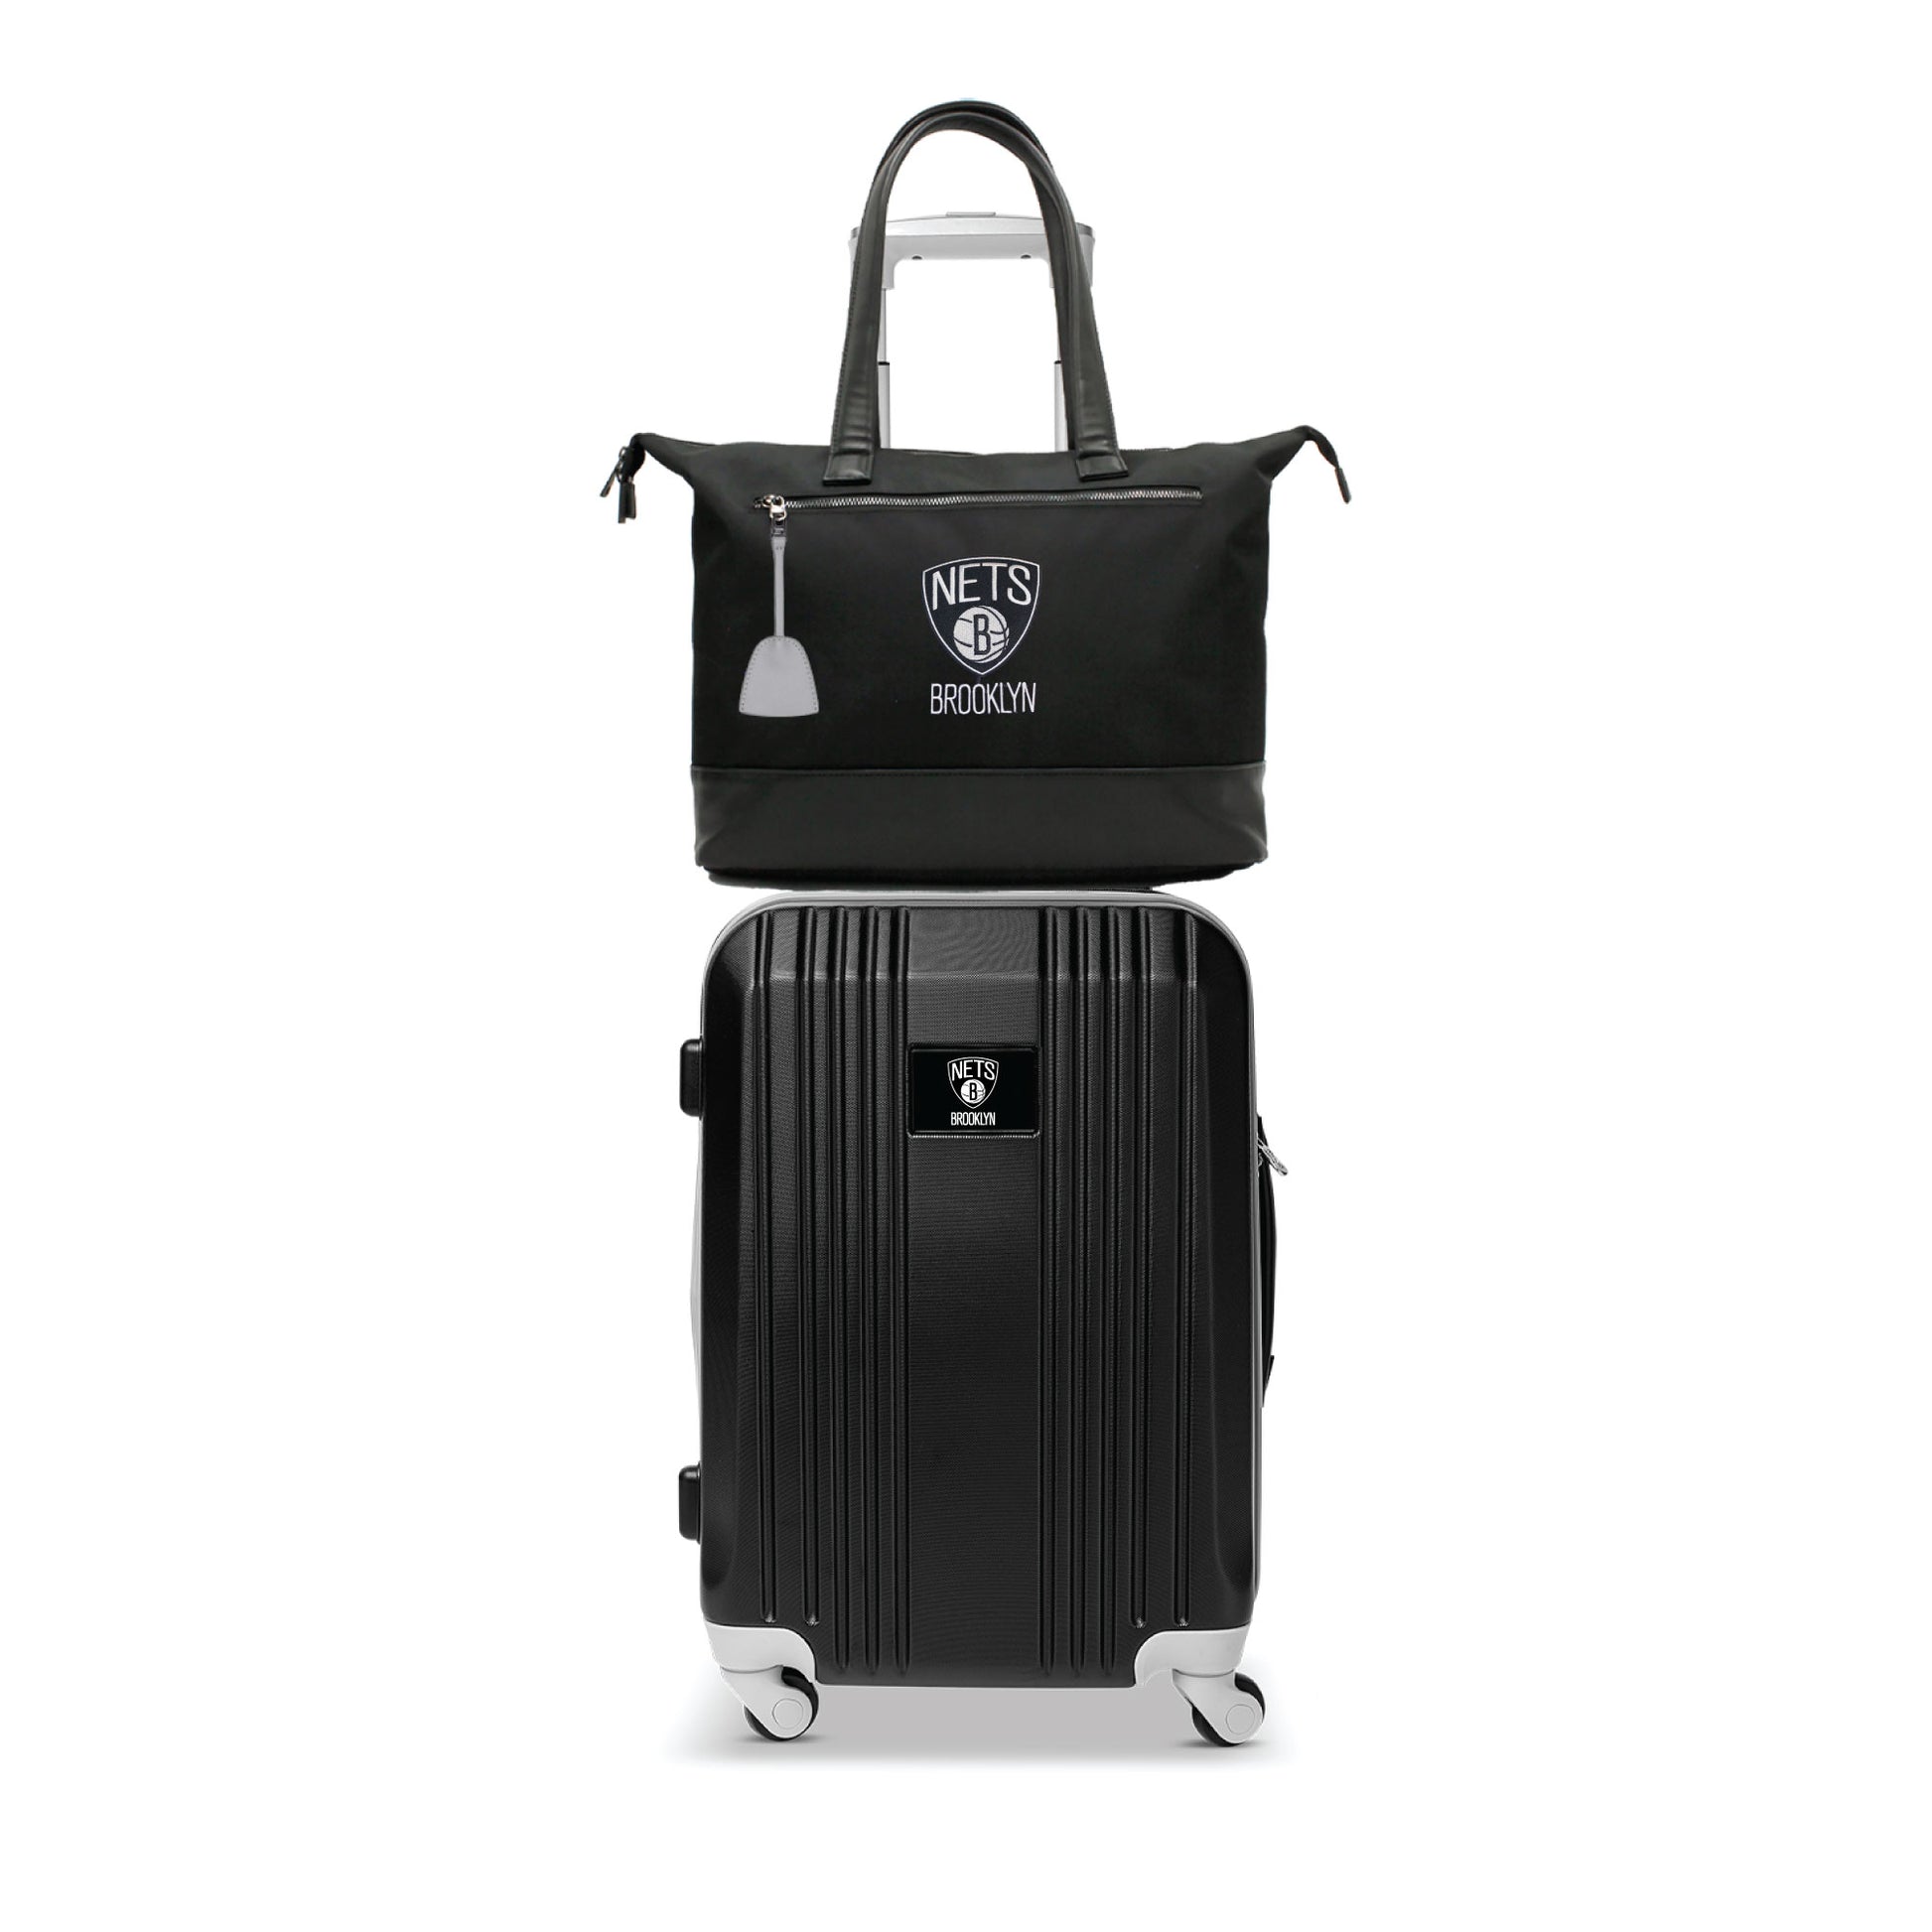 Brooklyn Nets Premium Laptop Tote Bag and Luggage Set